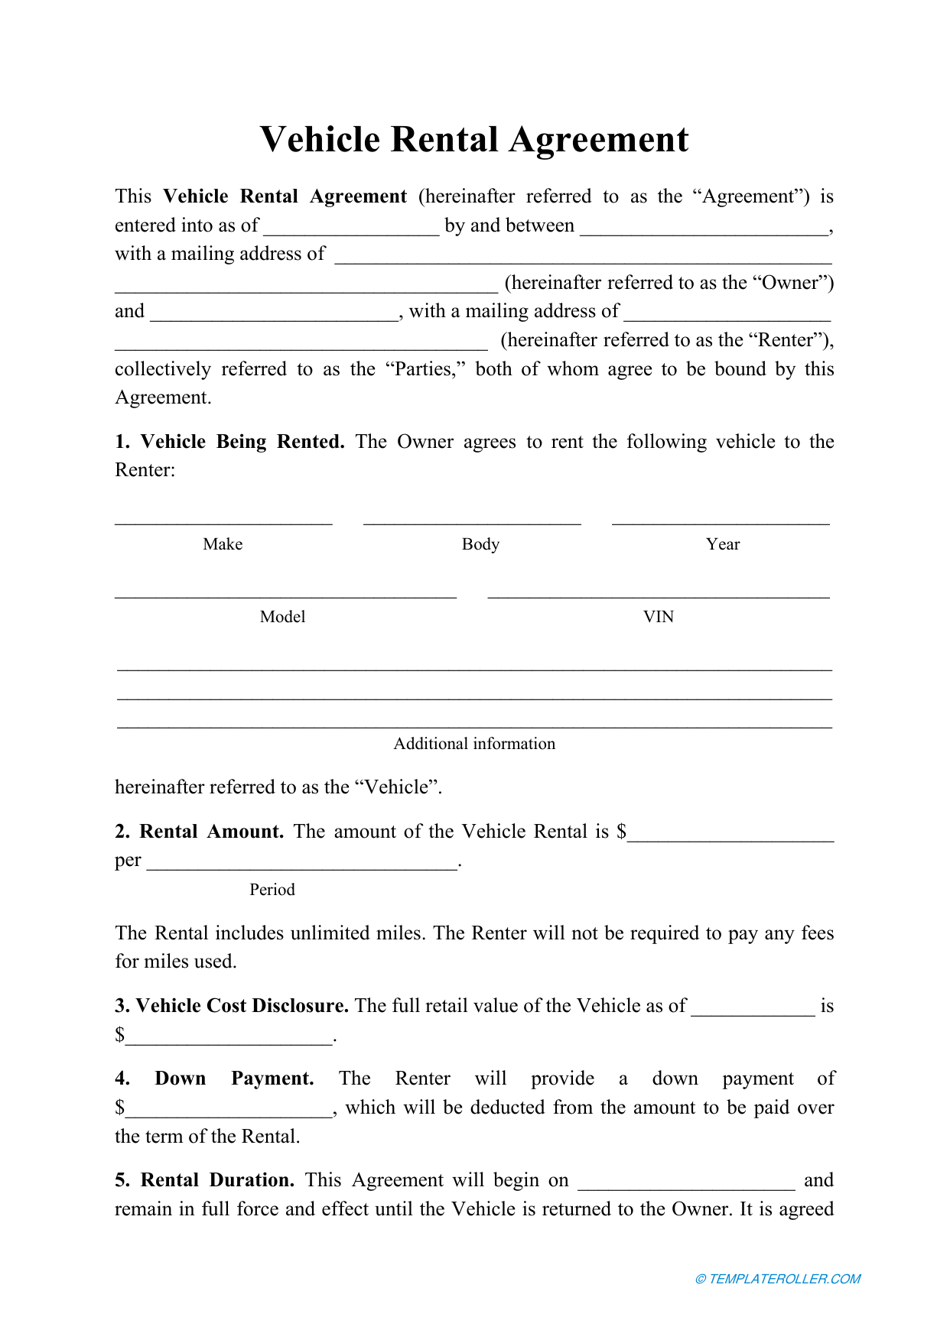 Vehicle Rental Agreement Template Download Printable PDF Inside owner operator lease agreement template